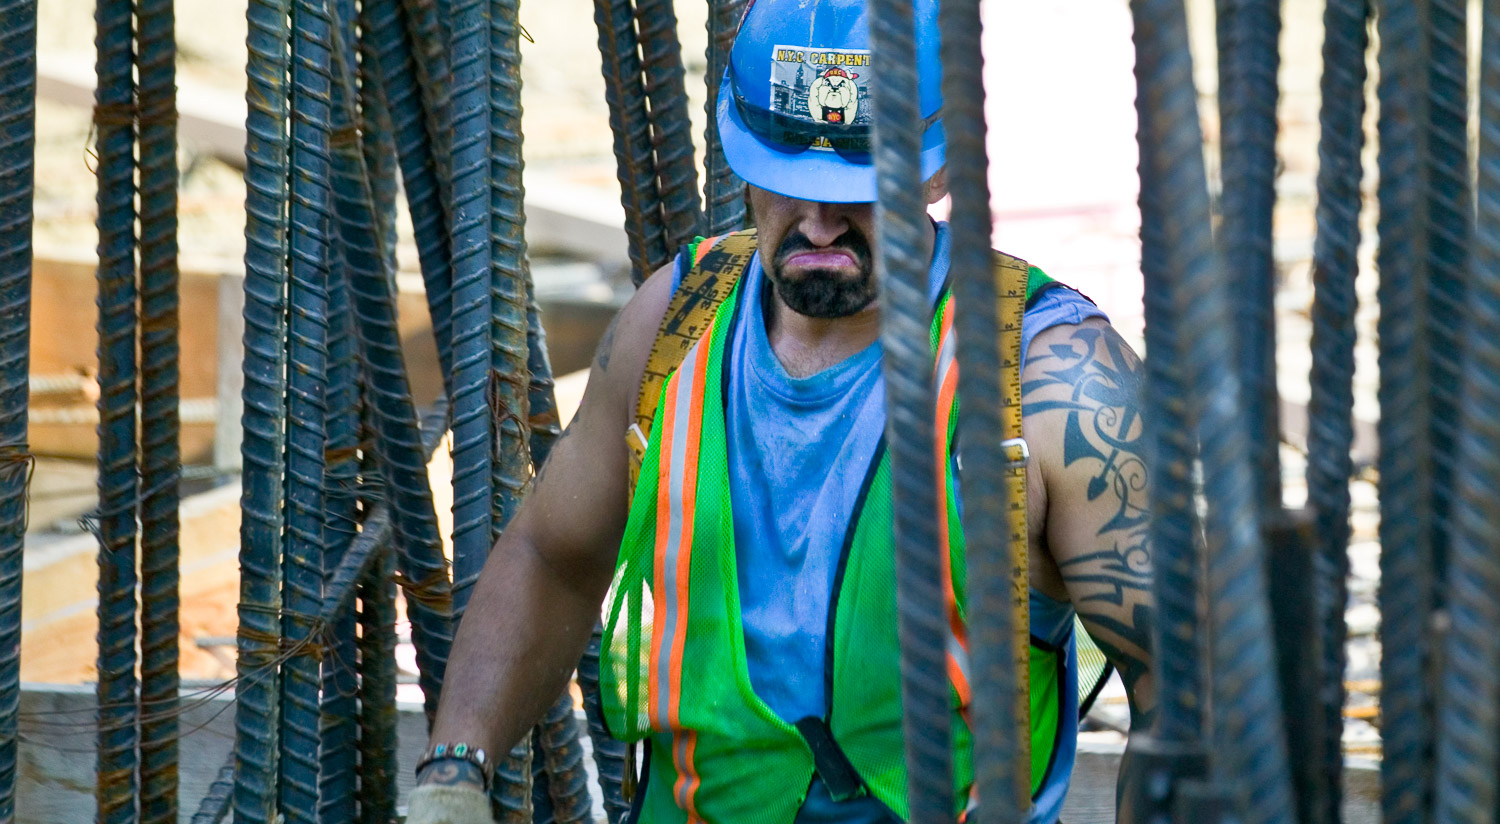 Iron Worker, Rebuilding the Trades